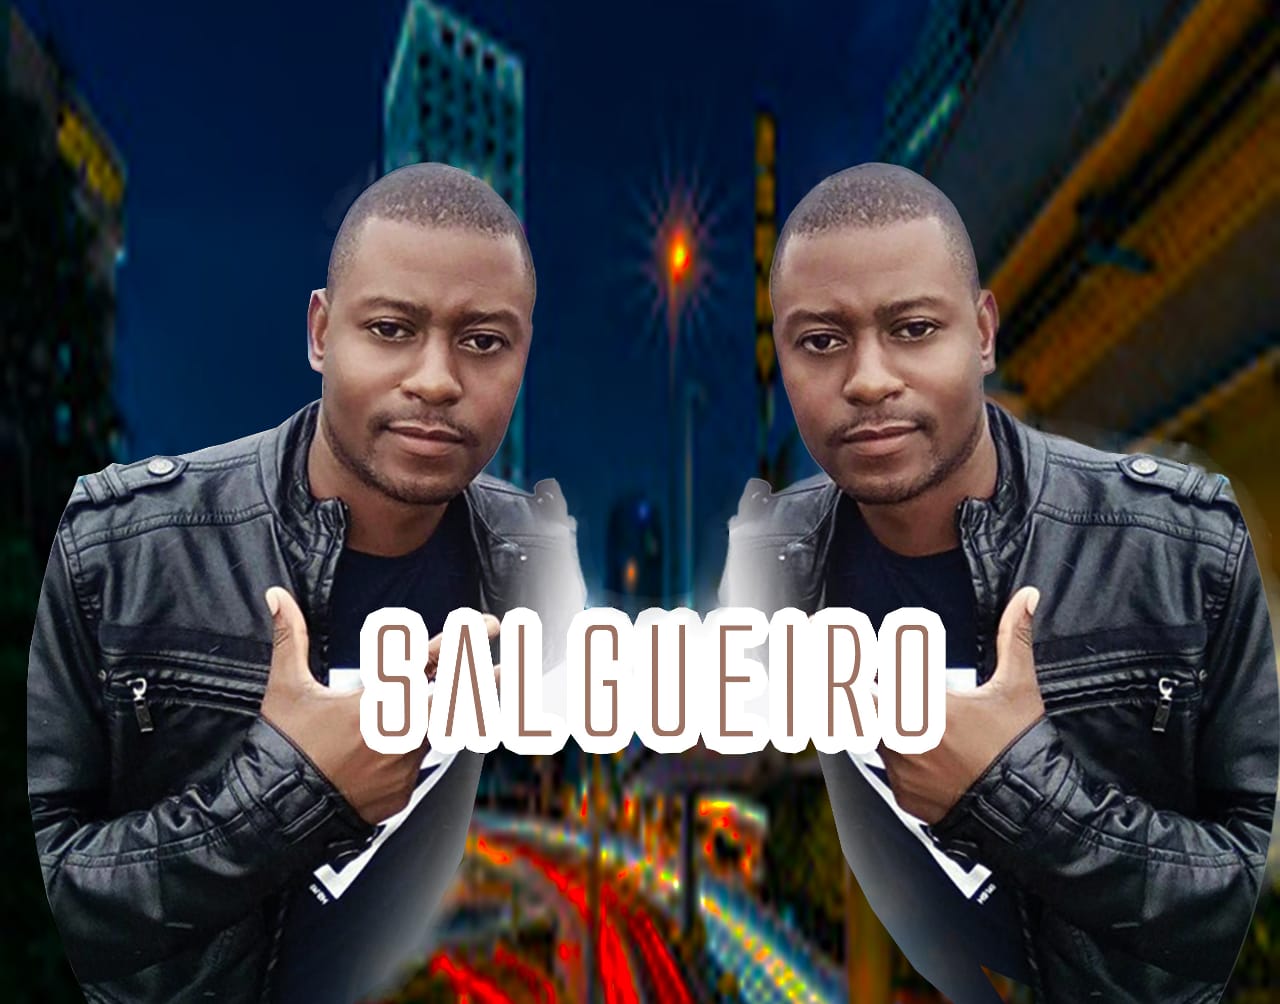 DOWLOAND MP3: Salgueiro - The Most Wanted (Ep) (2019 ...